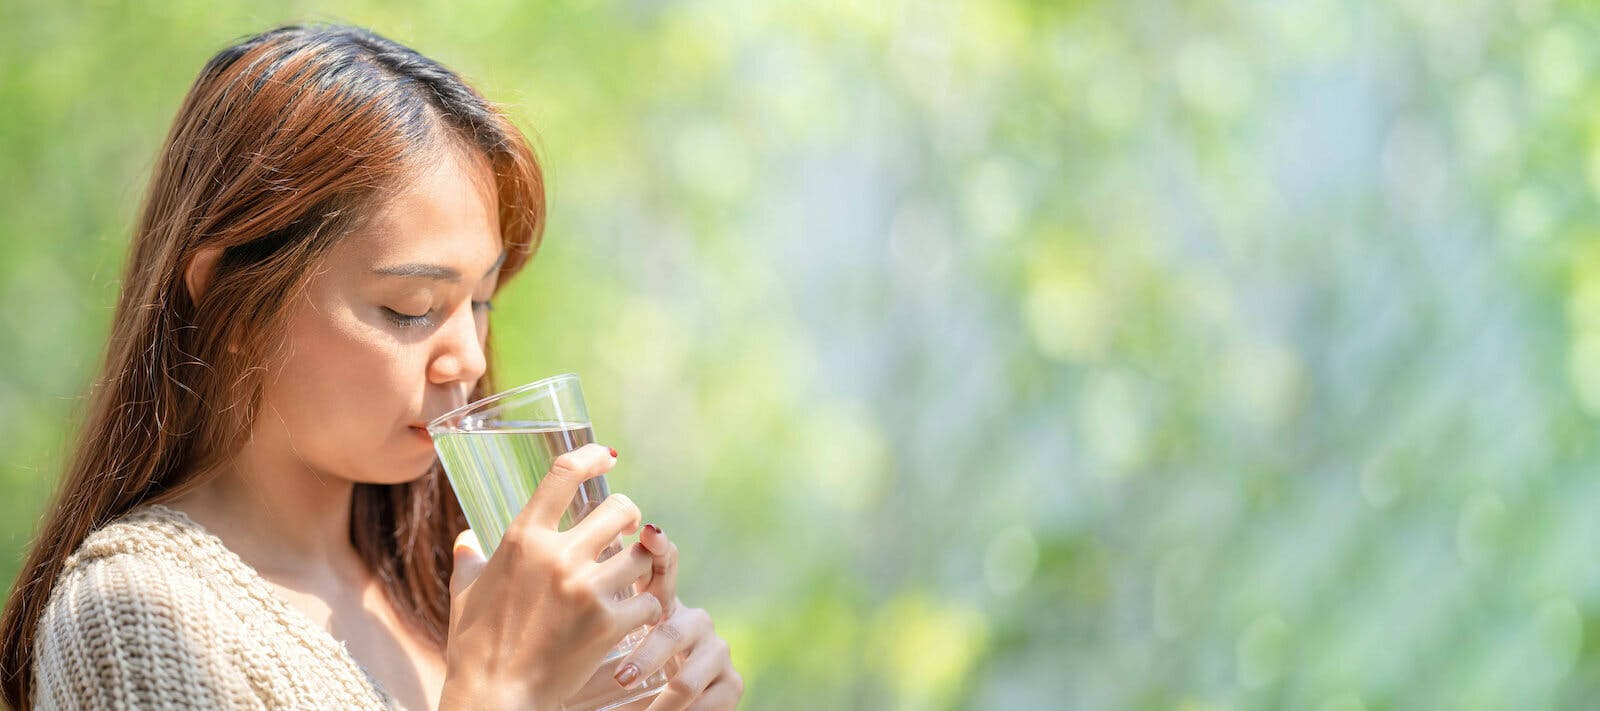 Not drinking enough water: woman drinking a glass of water